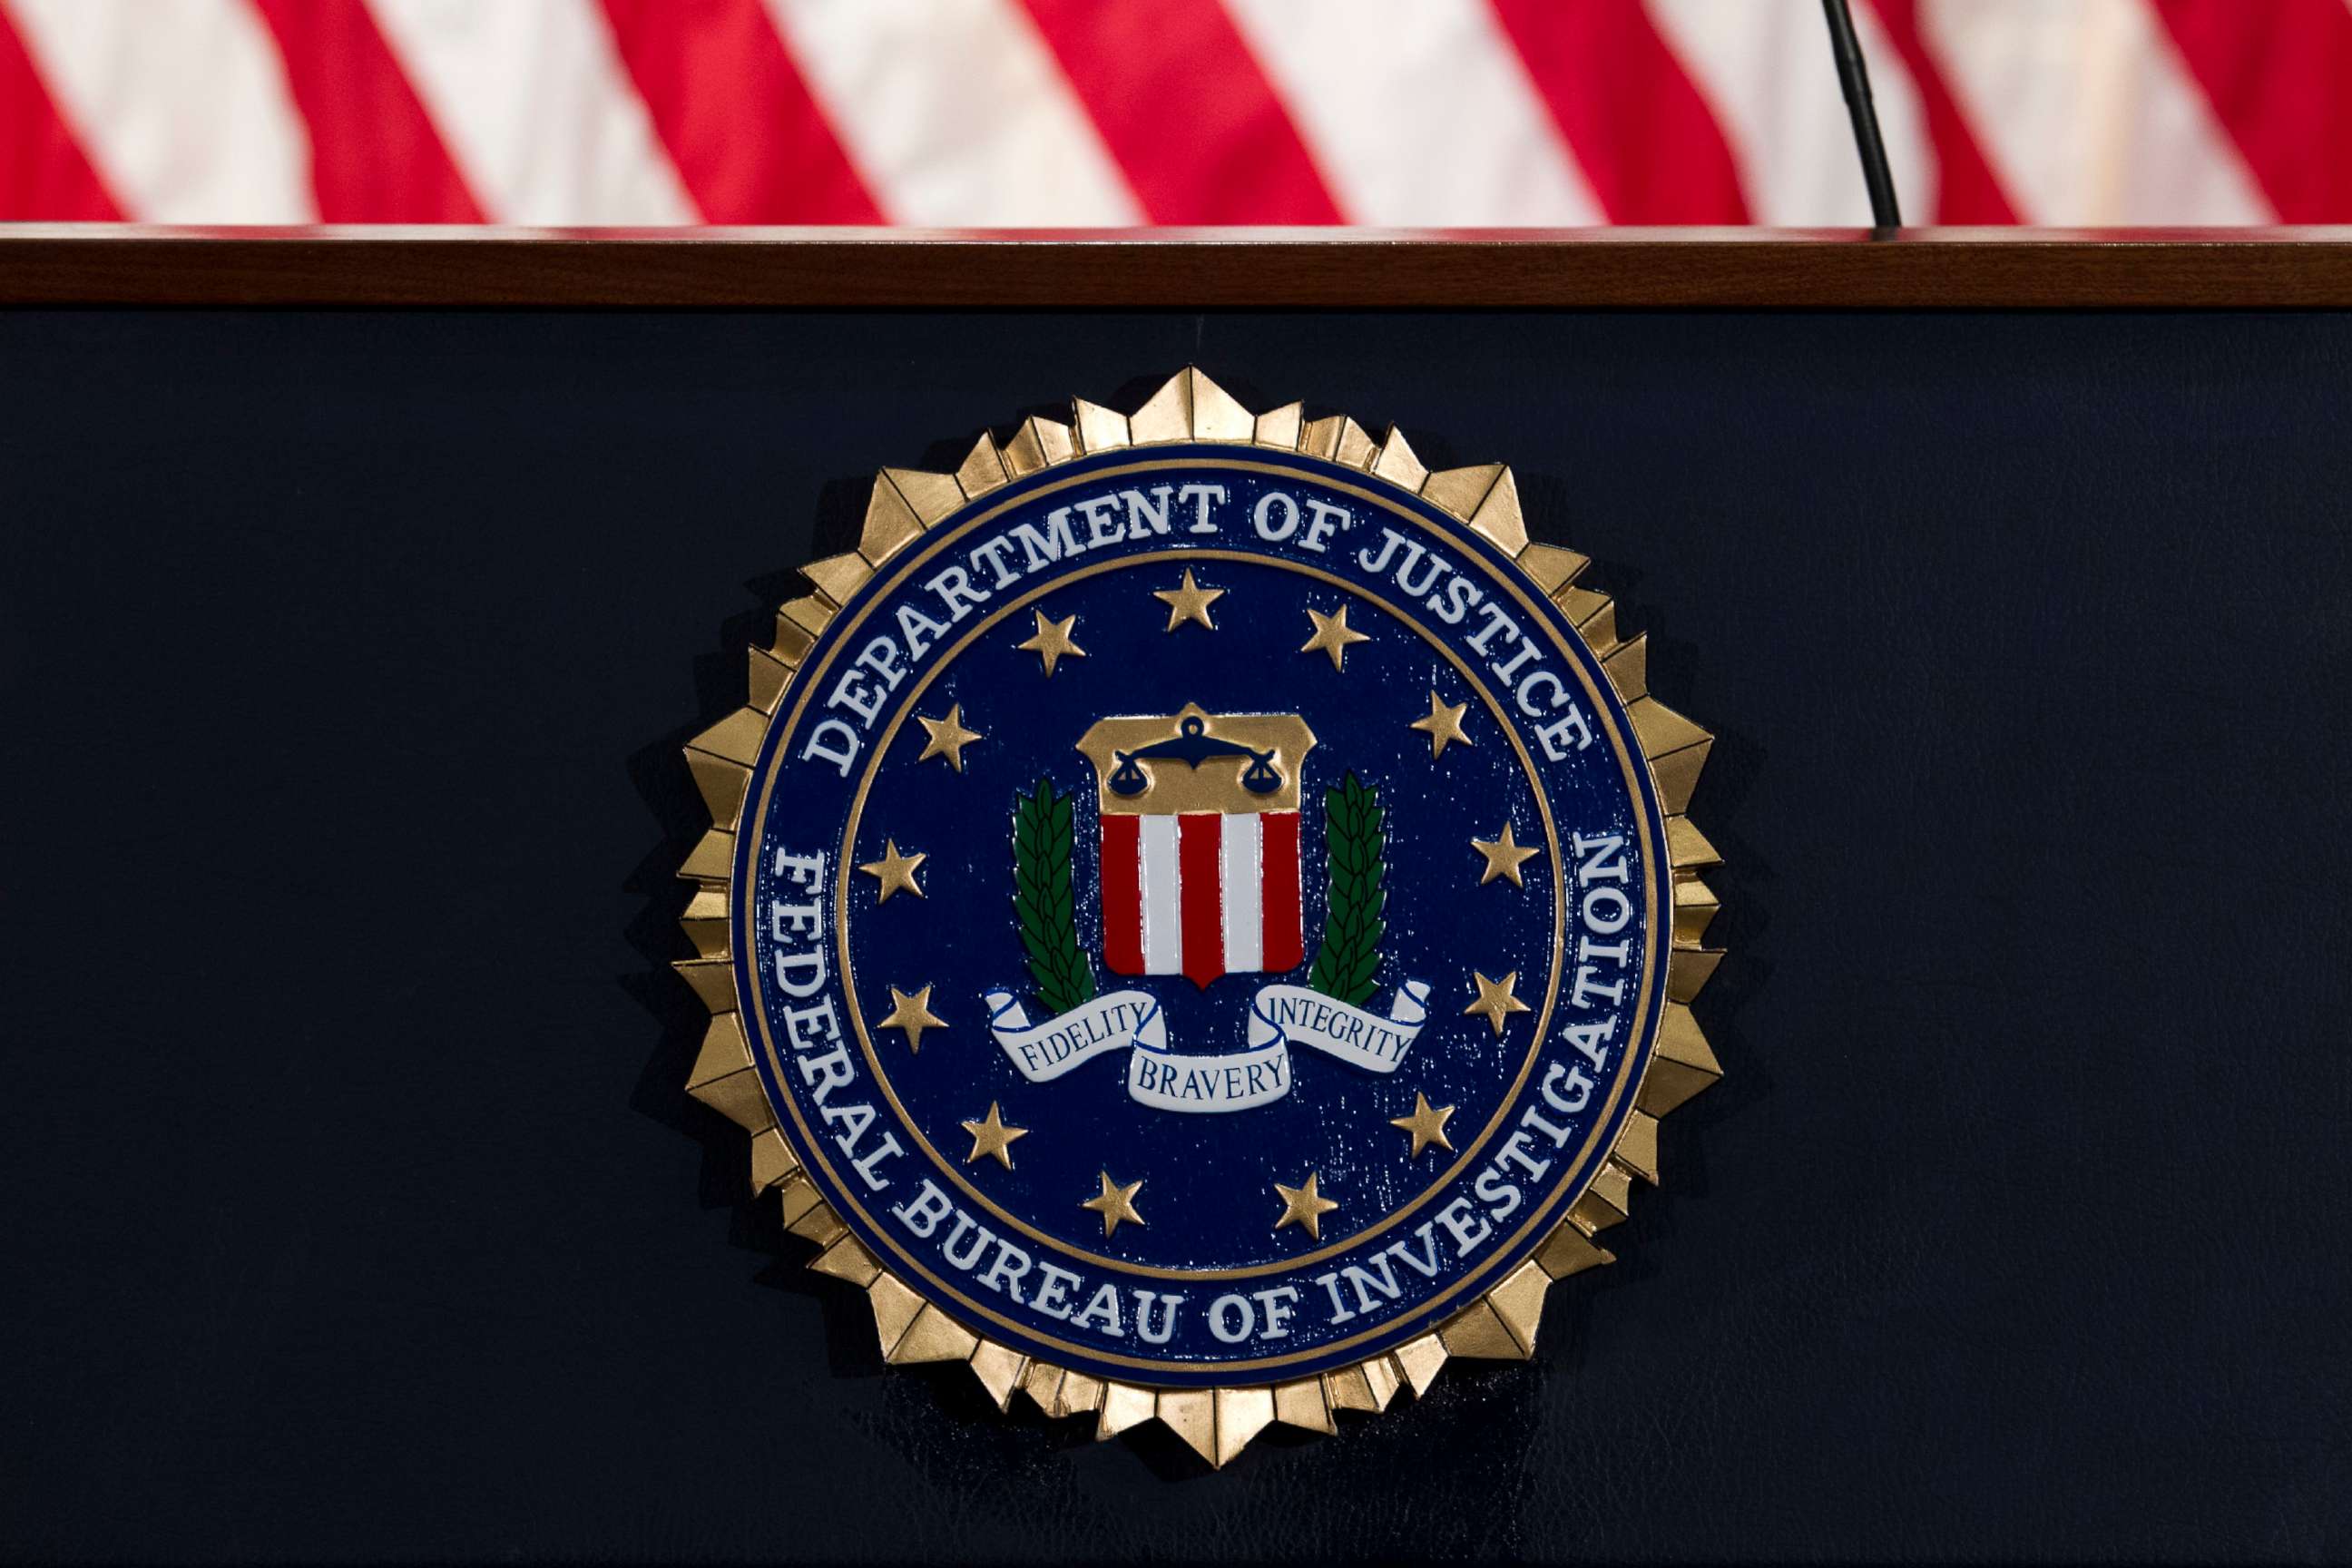 PHOTO: In this June 14, 2018, file photo, the FBI seal is seen at FBI headquarters in Washington, D.C.